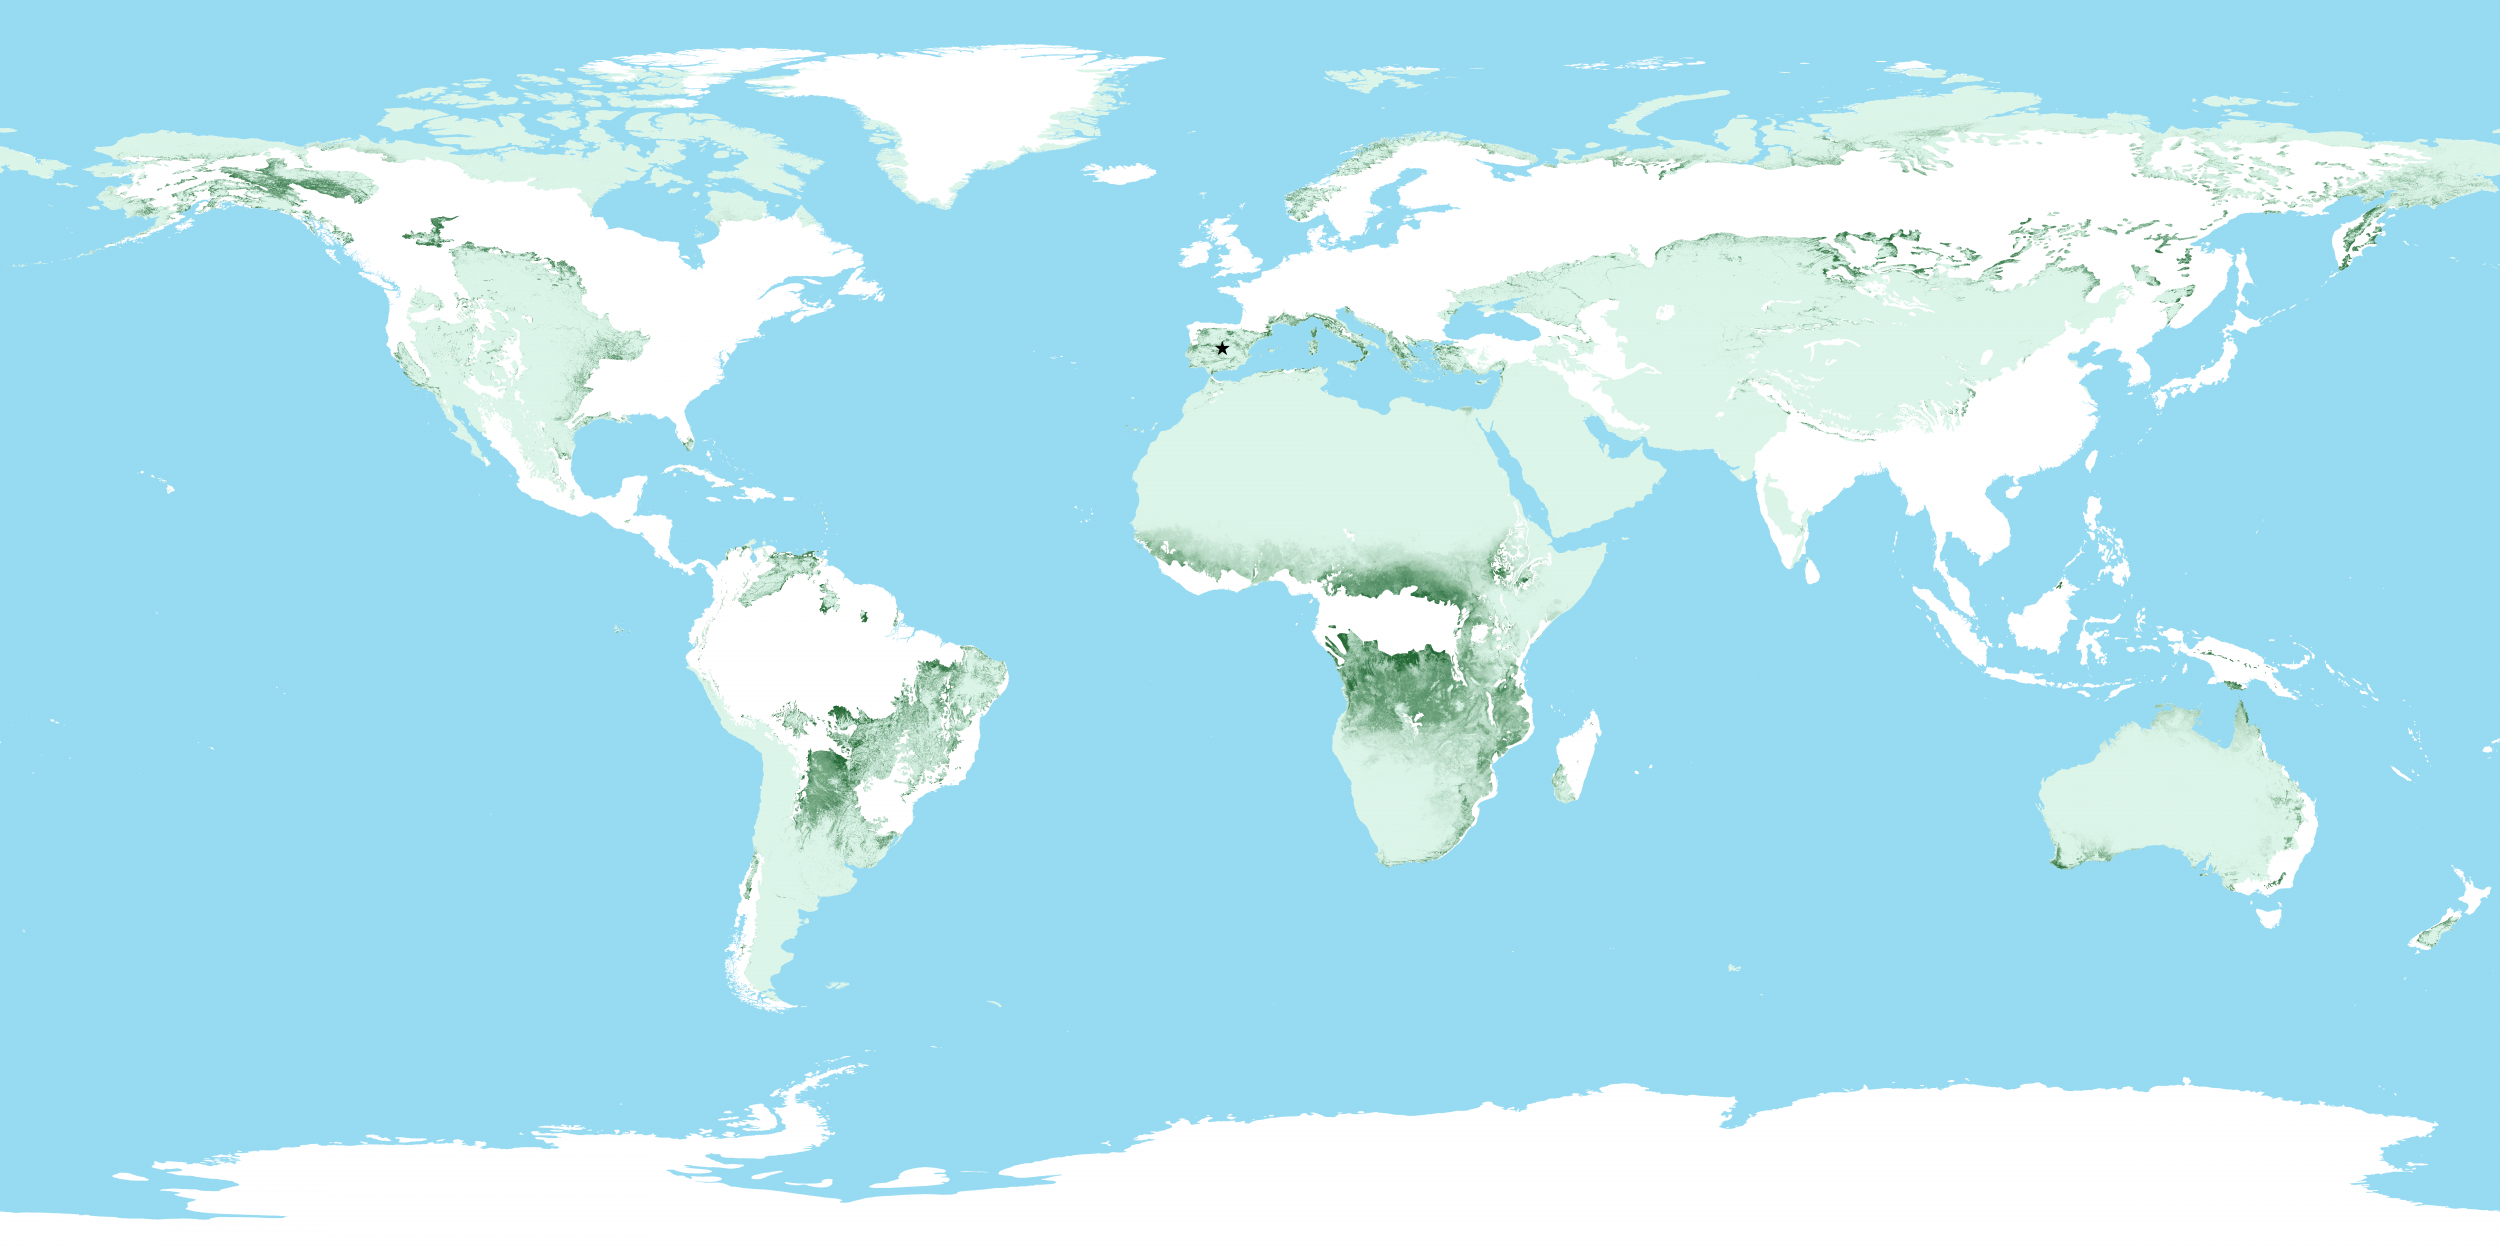 Tree cover in rangelands in the Year 2000